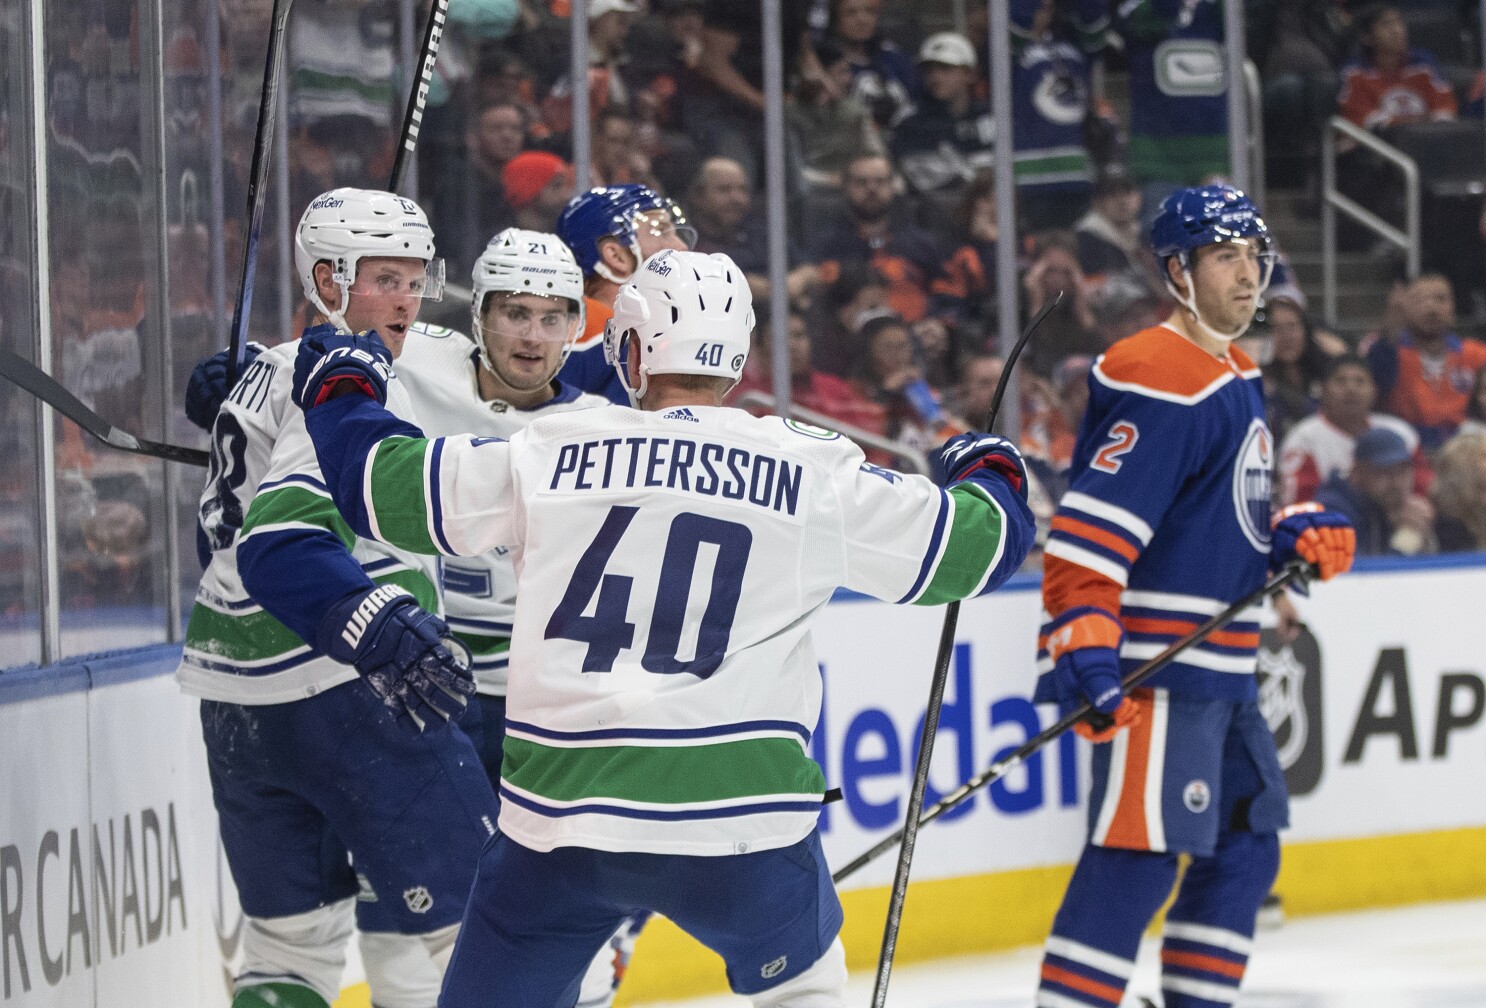 Vancouver Canucks' Hughes Continues to Improve Early this Season